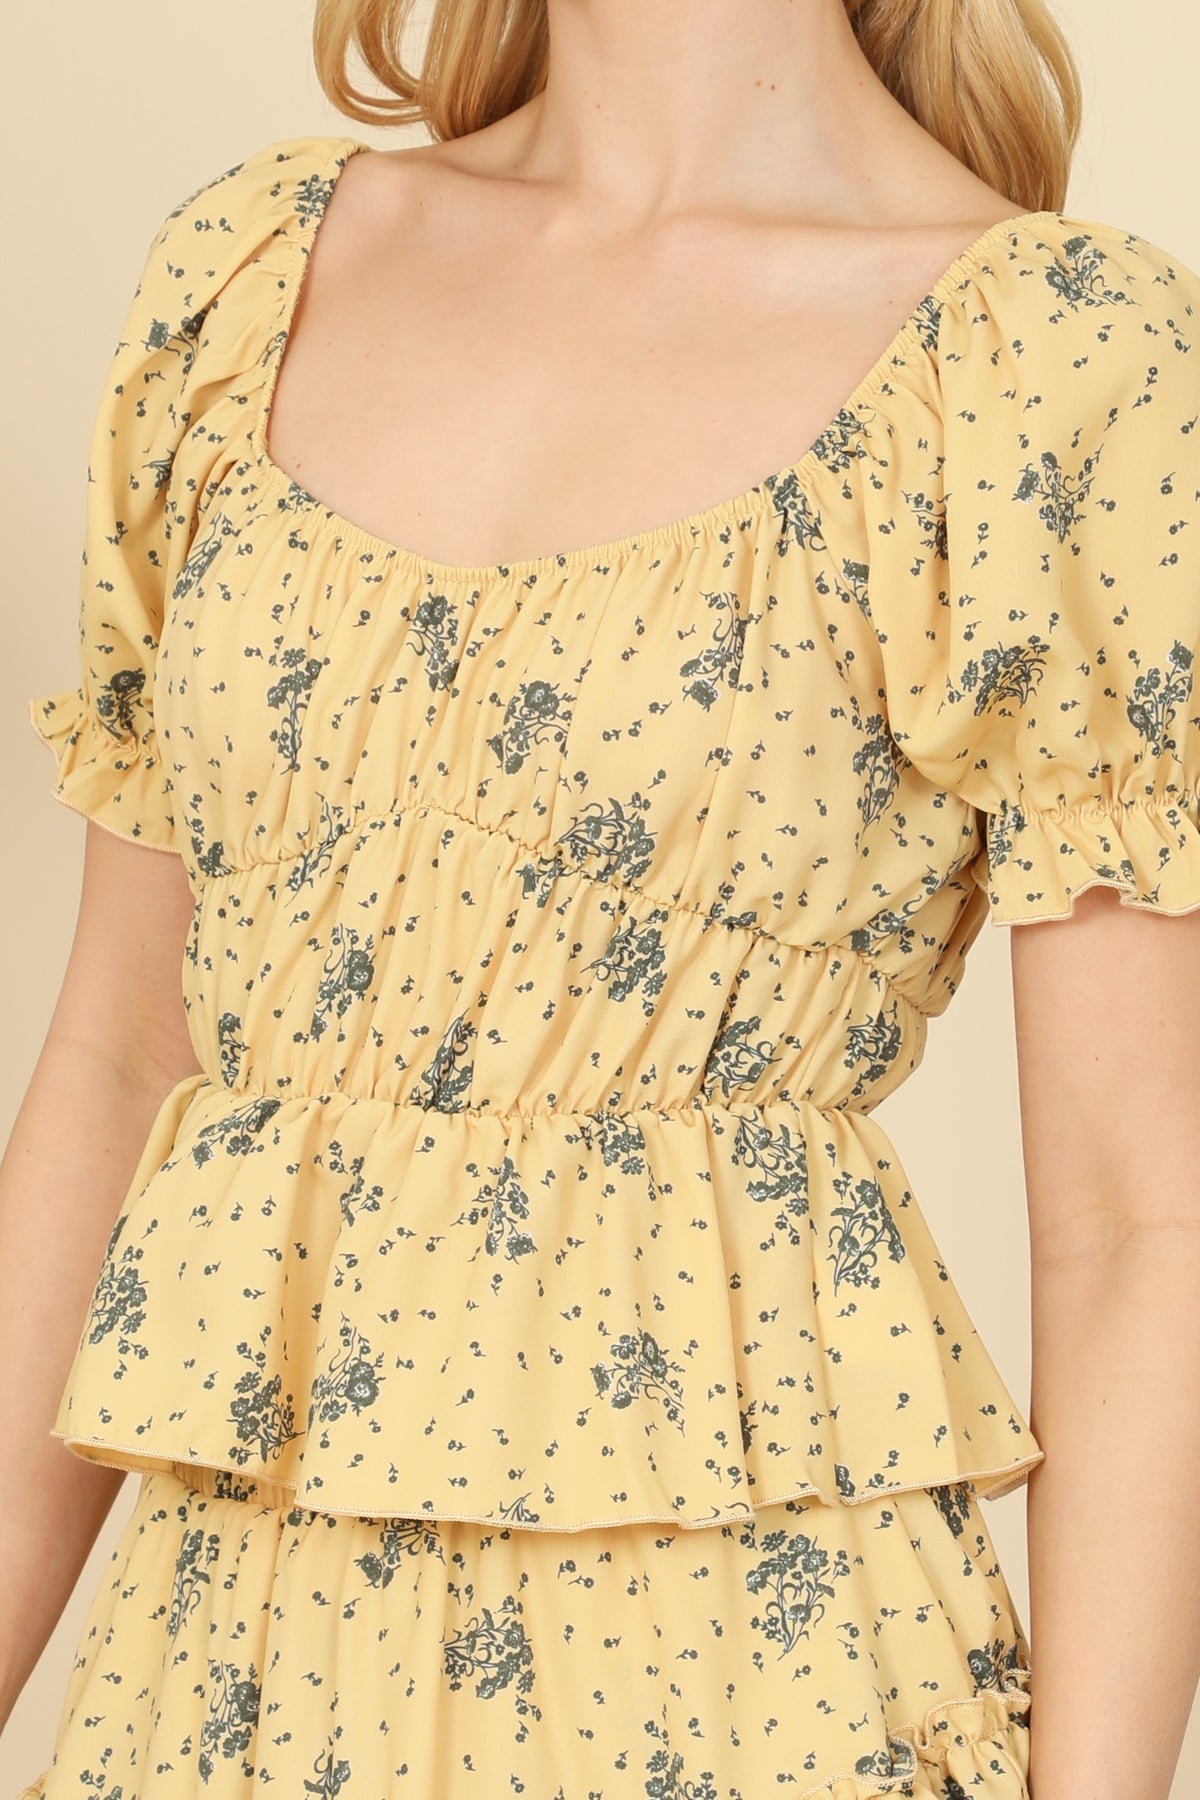 YELLOW FLORAL TOP AND SKIRT SET 1-2-2-1 (NOW $4.75 ONLY!)